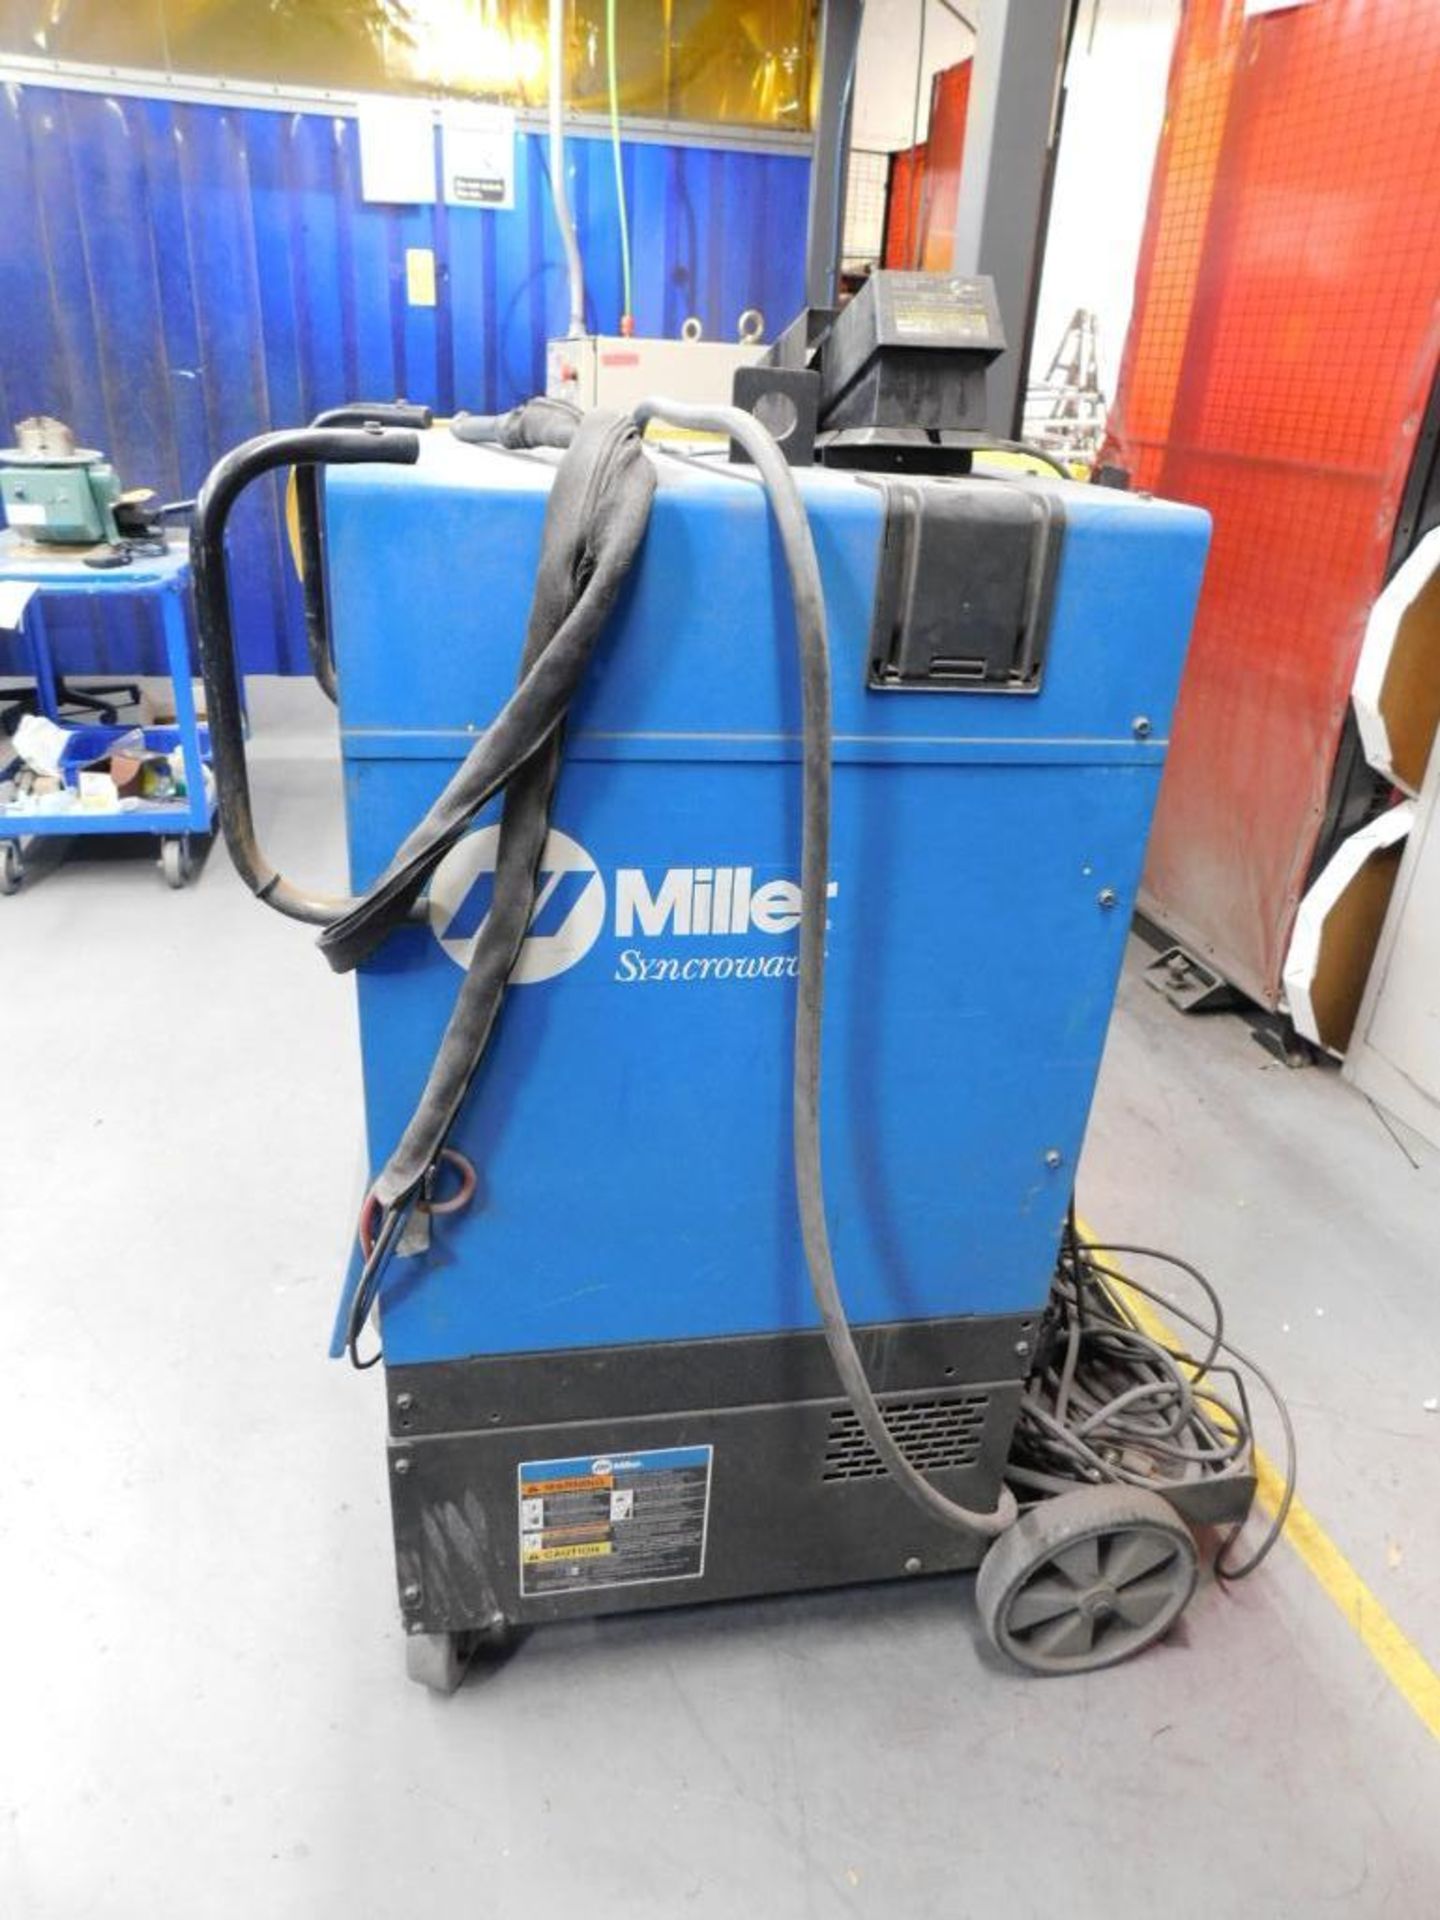 Miller Syncrowave 250 DX Tig Welder w/Cooler, Foot Control, Tig Torch (may need repair) - Image 3 of 3